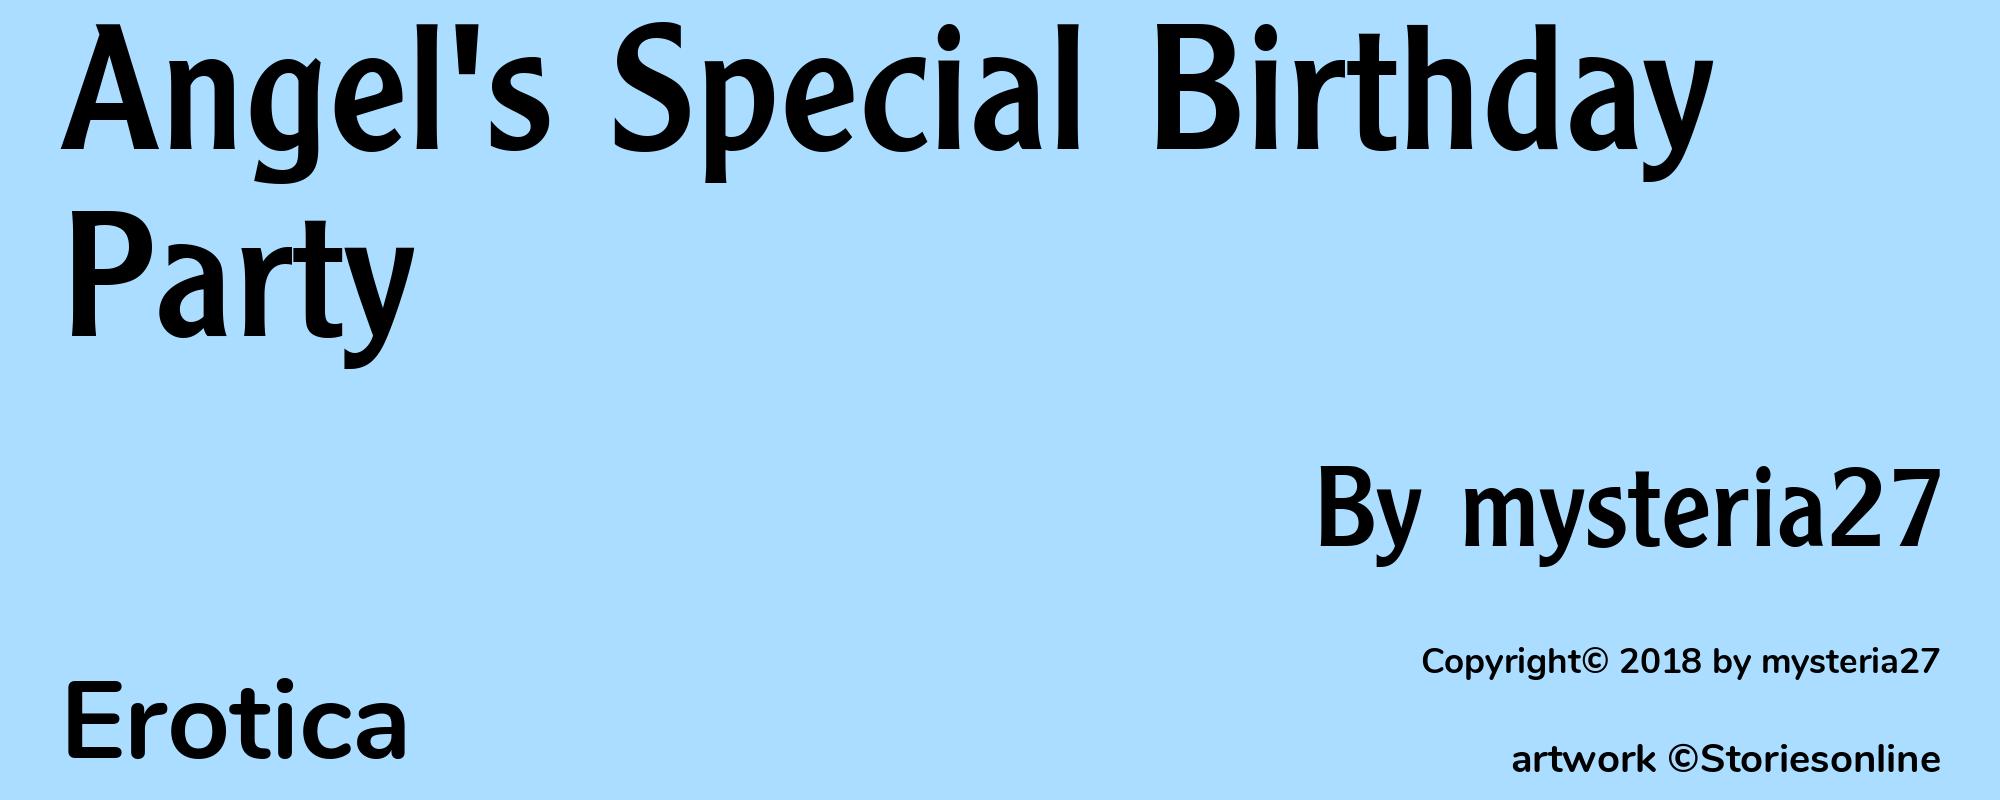 Angel's Special Birthday Party - Cover